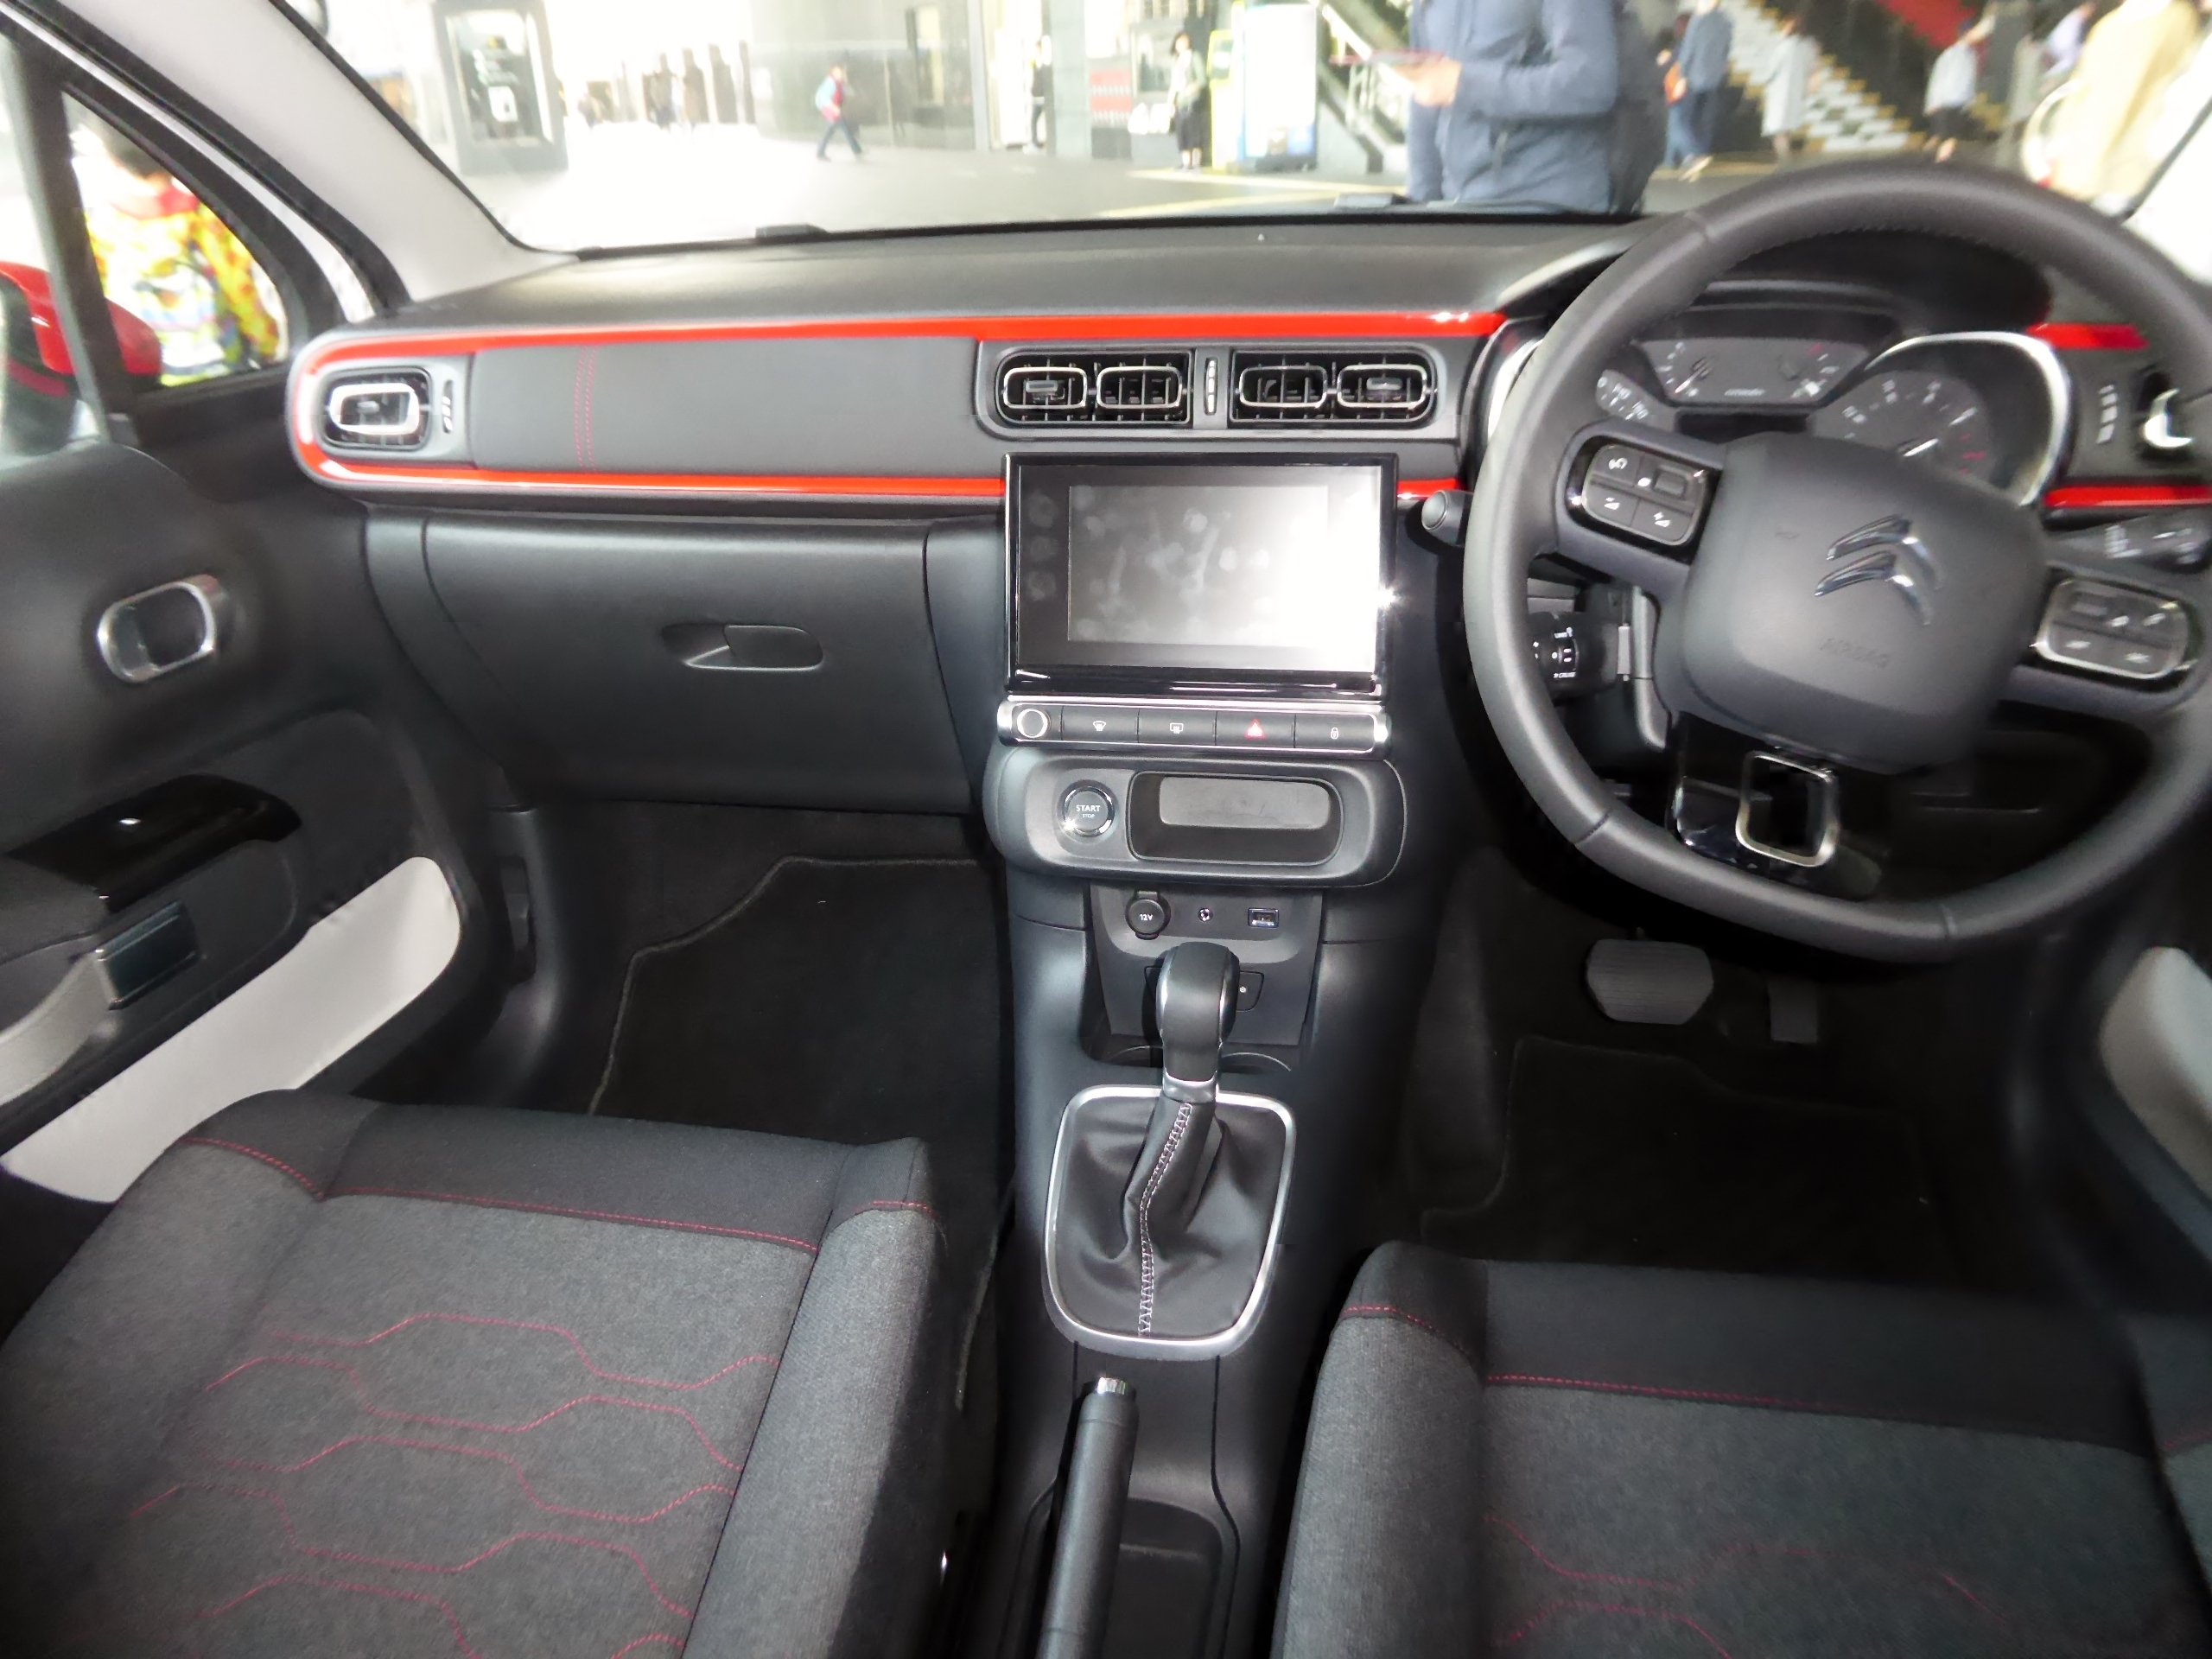 File:The interior of Citroën C3 (3rd - Wikimedia Commons